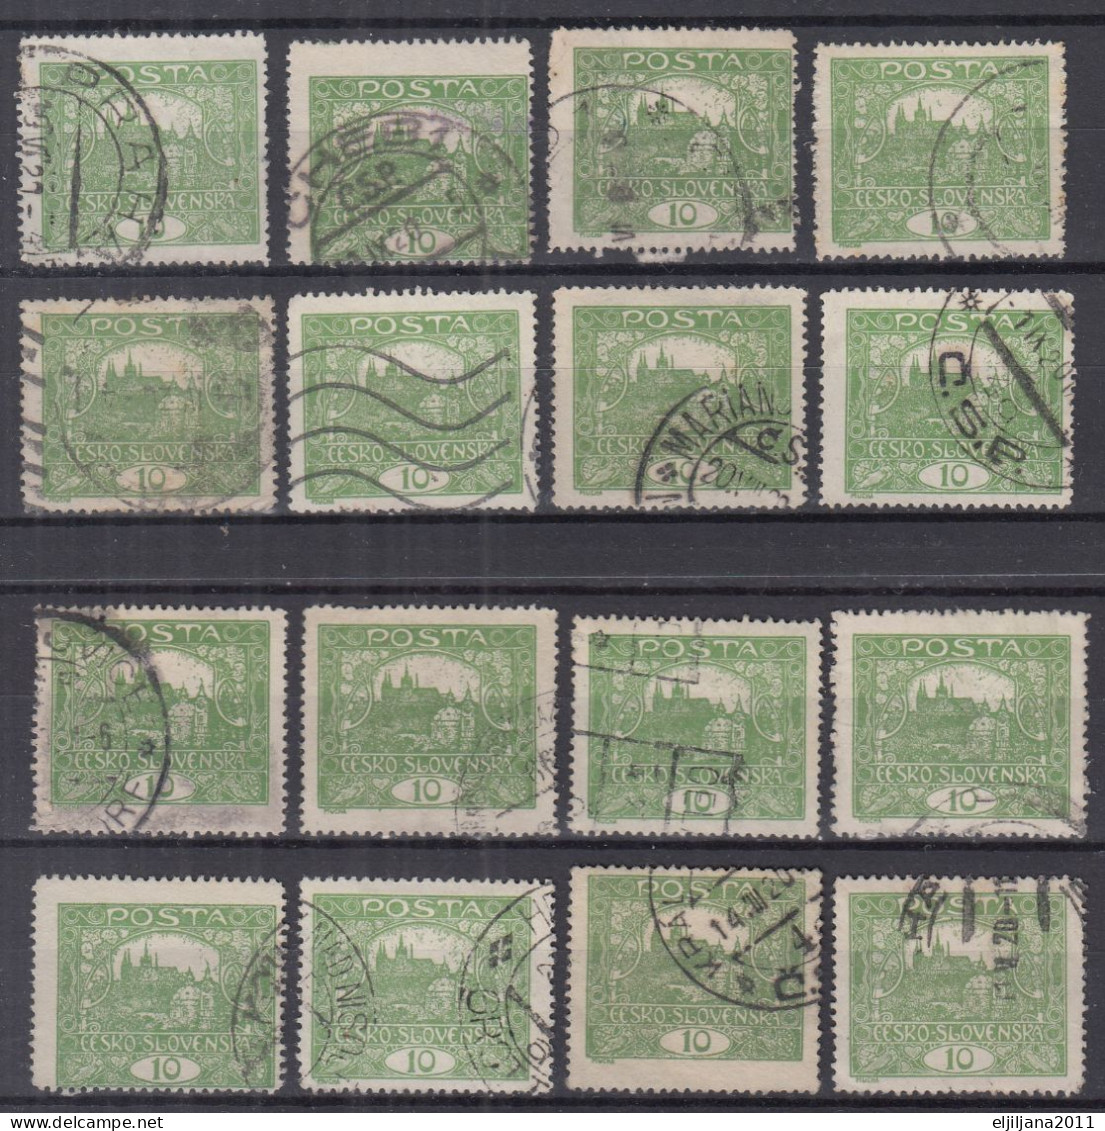 ⁕ Czechoslovakia 1919/20 ⁕ Hradcany 10 H. Mi.25 ⁕ 16v Used / Shades / Unchecked Perf. - Used Stamps